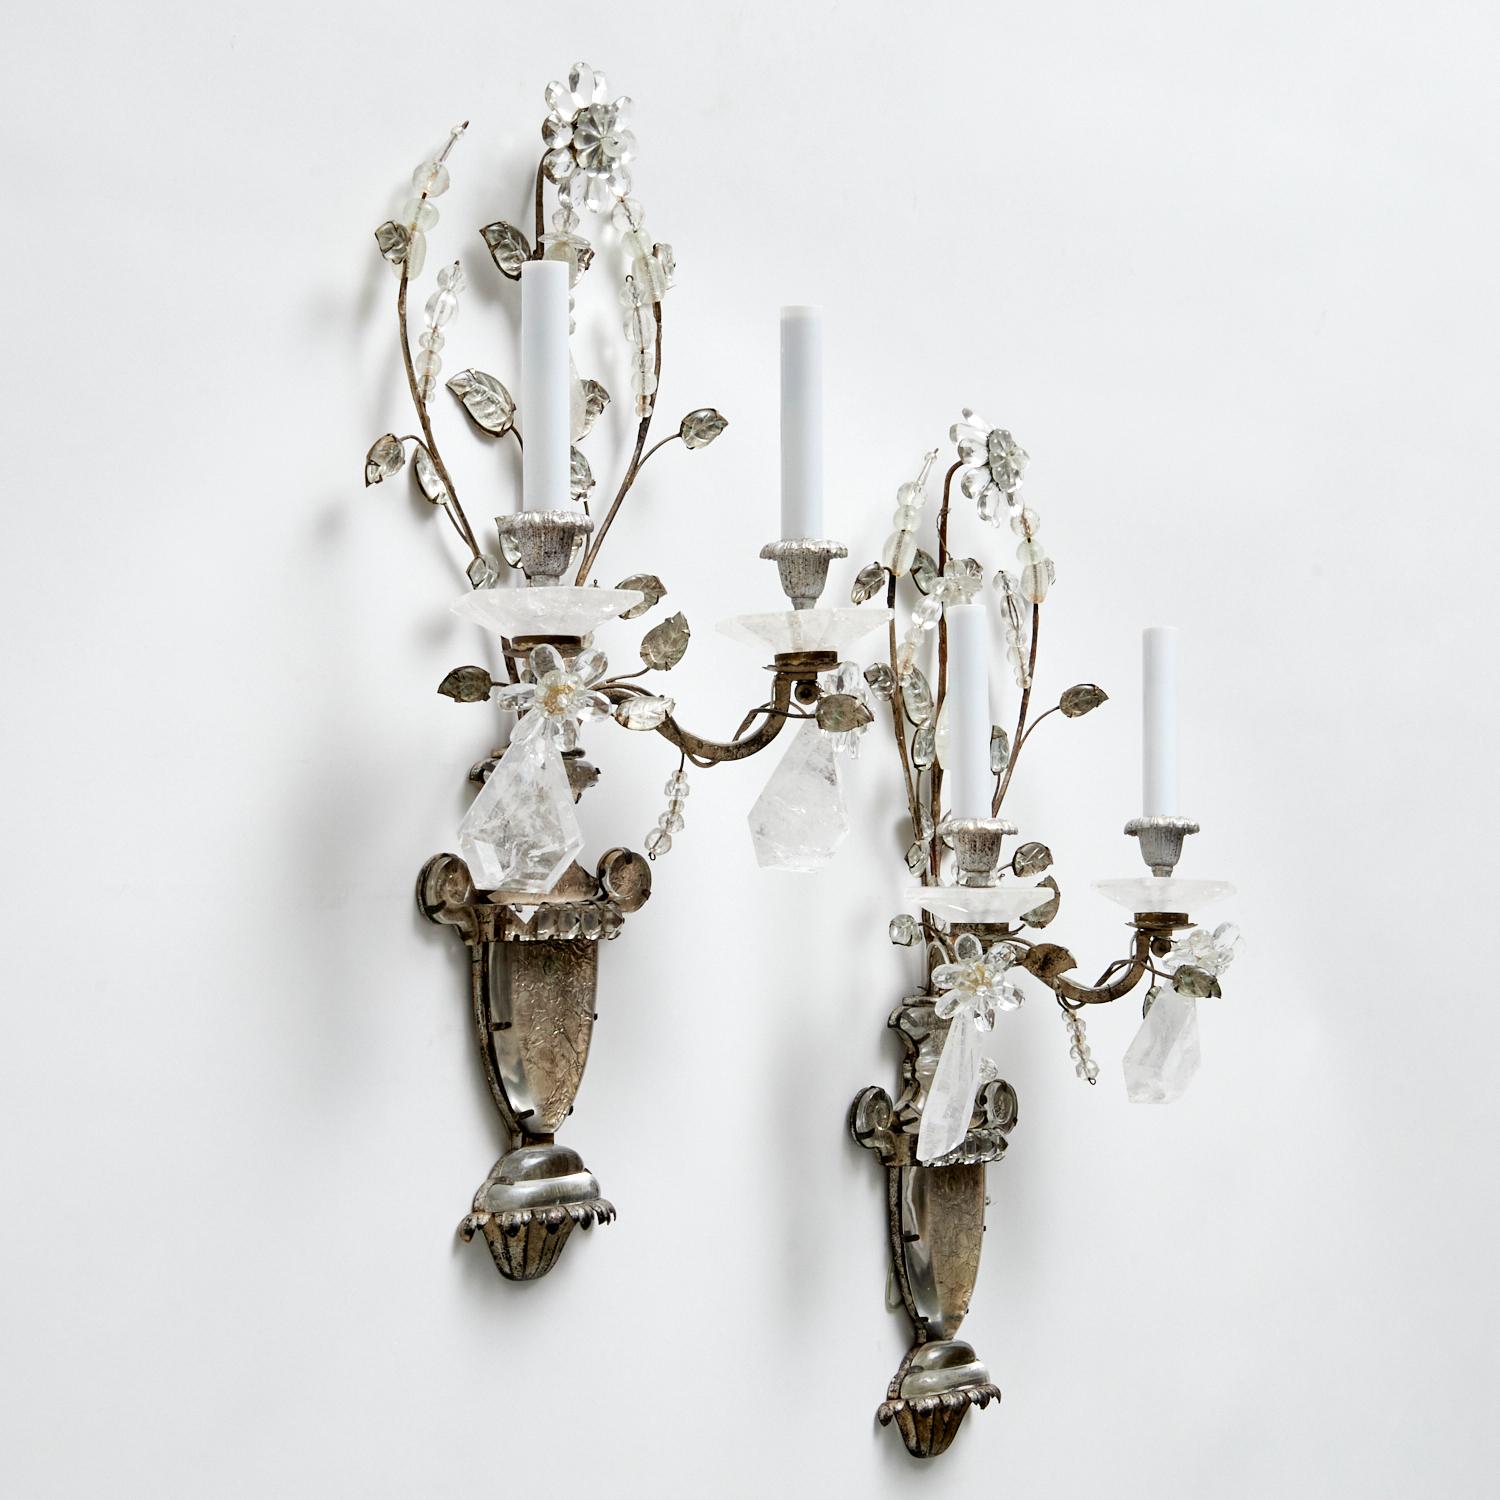 Gorgeous vintage pair of French MaisonBagues crystal rock and silver leaf sconces. Featuring an urn with flowers